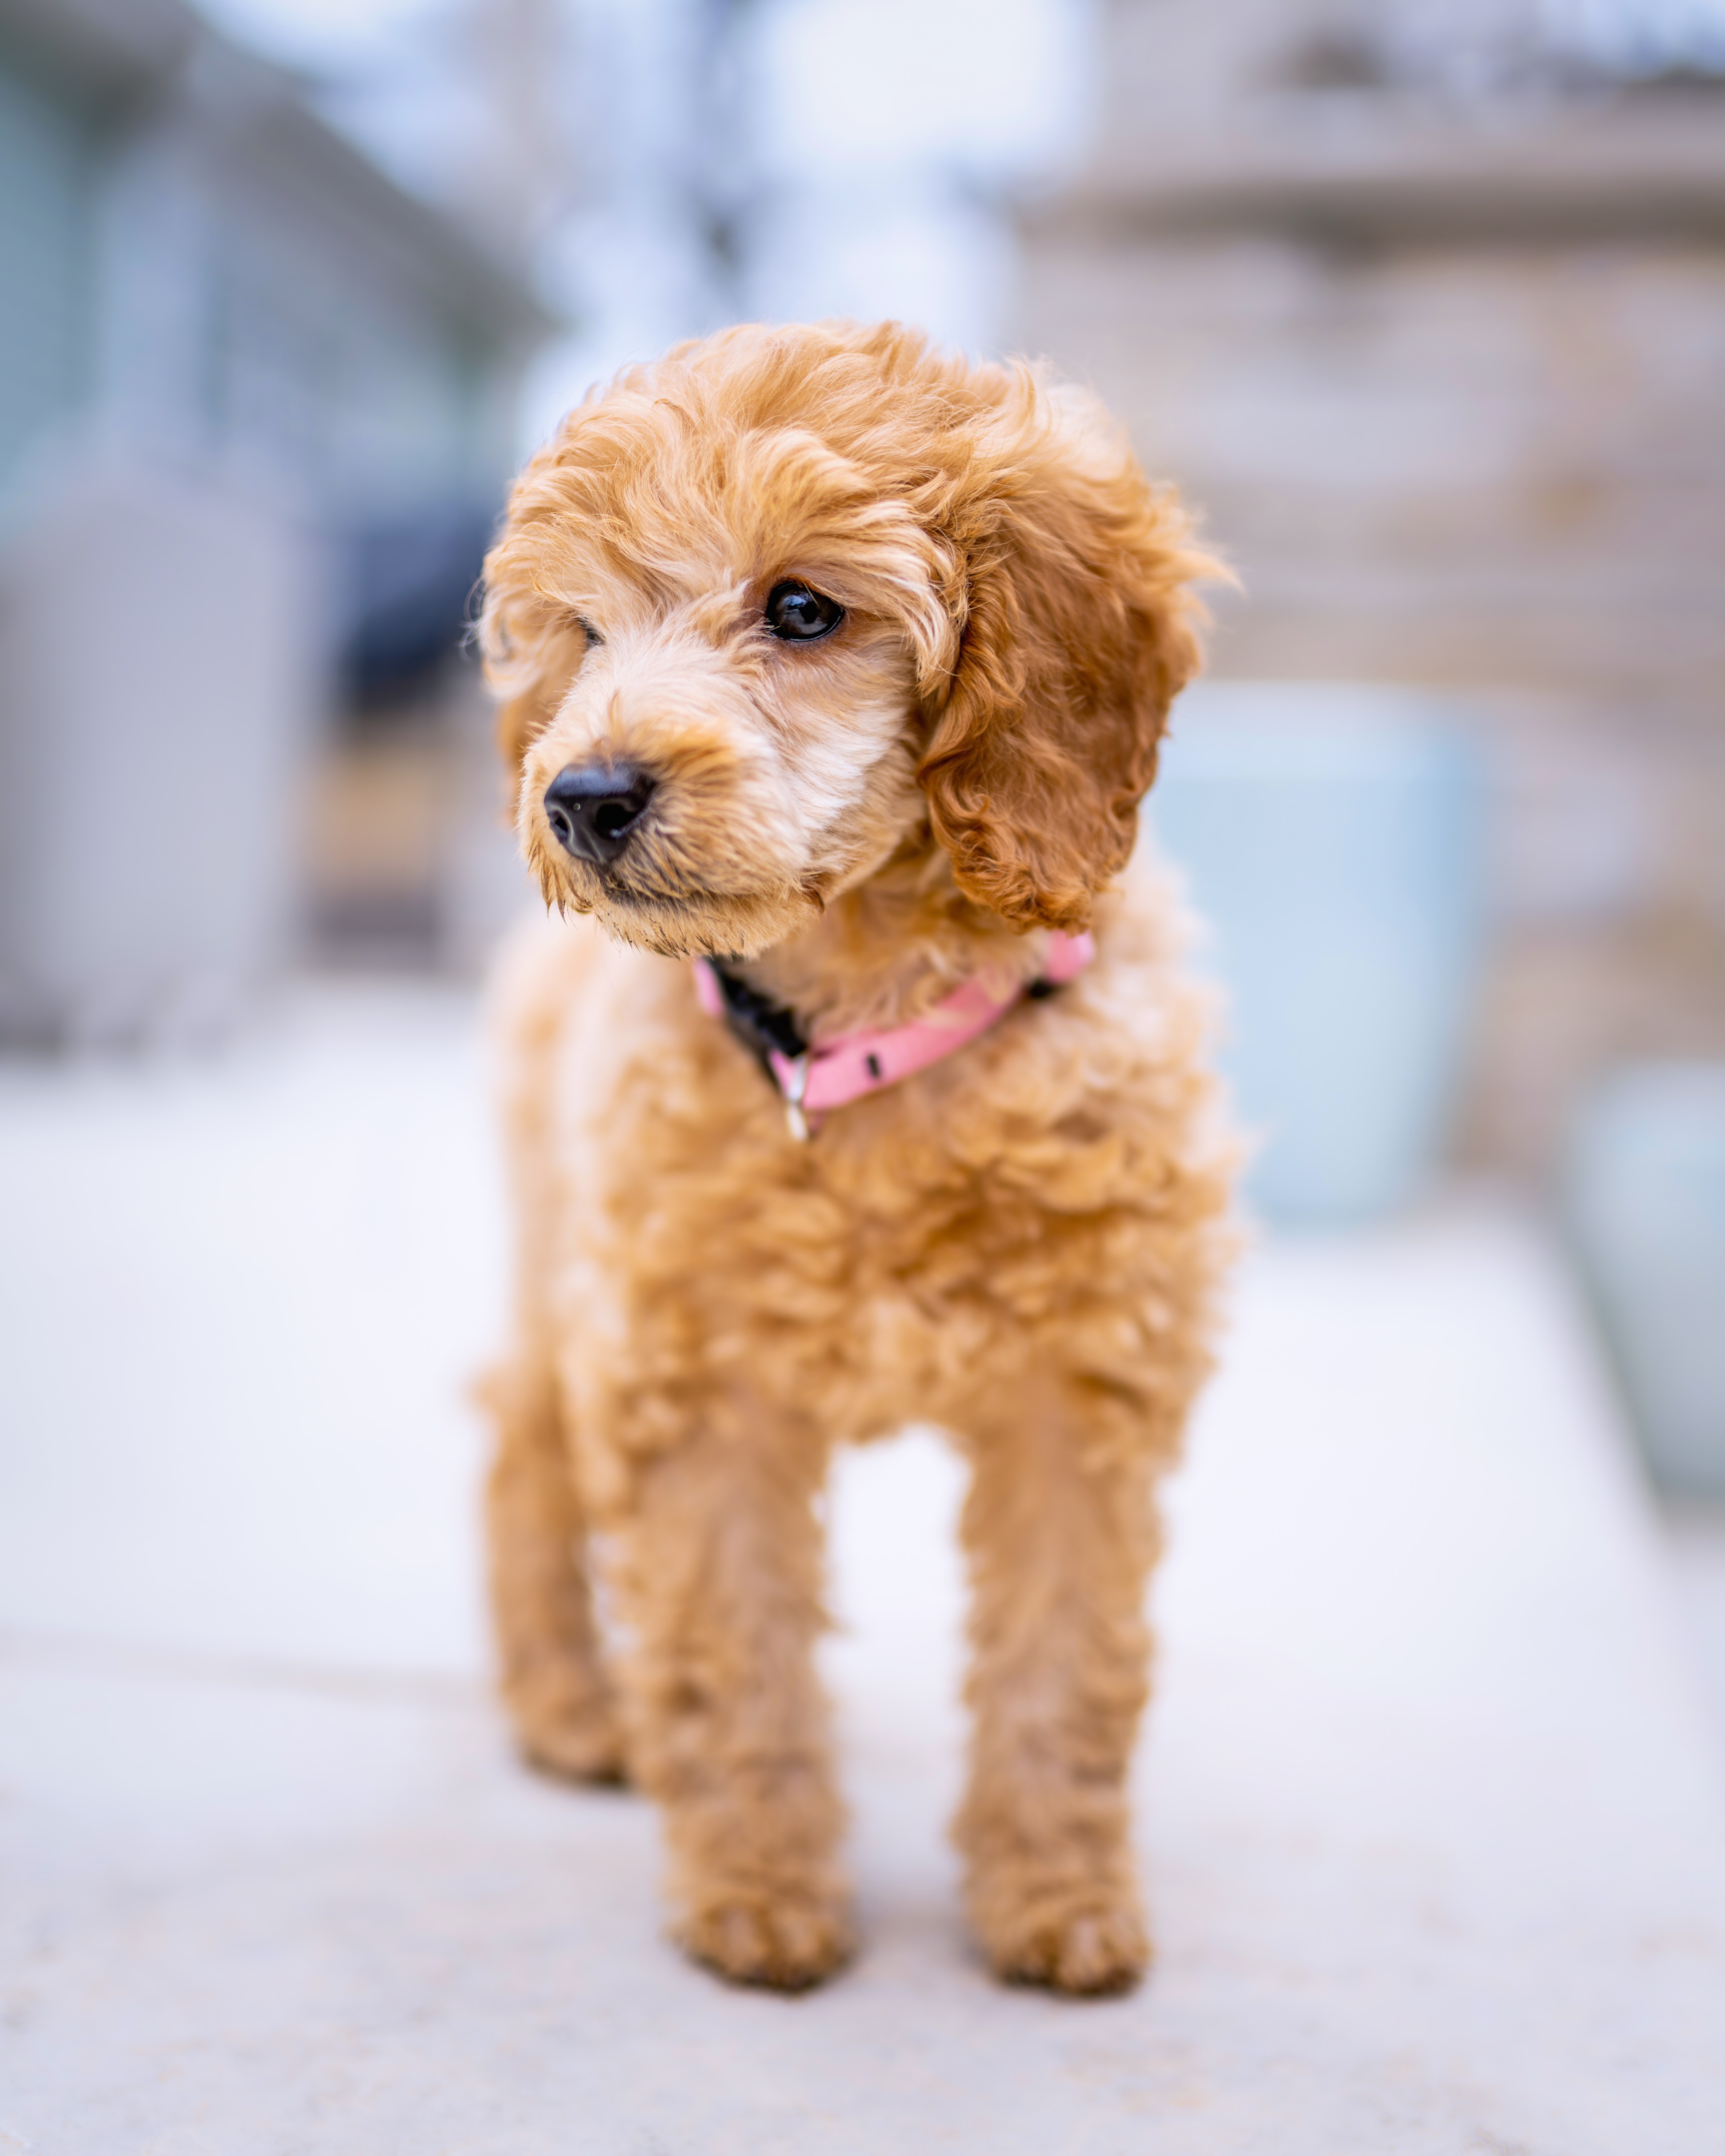 Fluffly poodle with soft ears